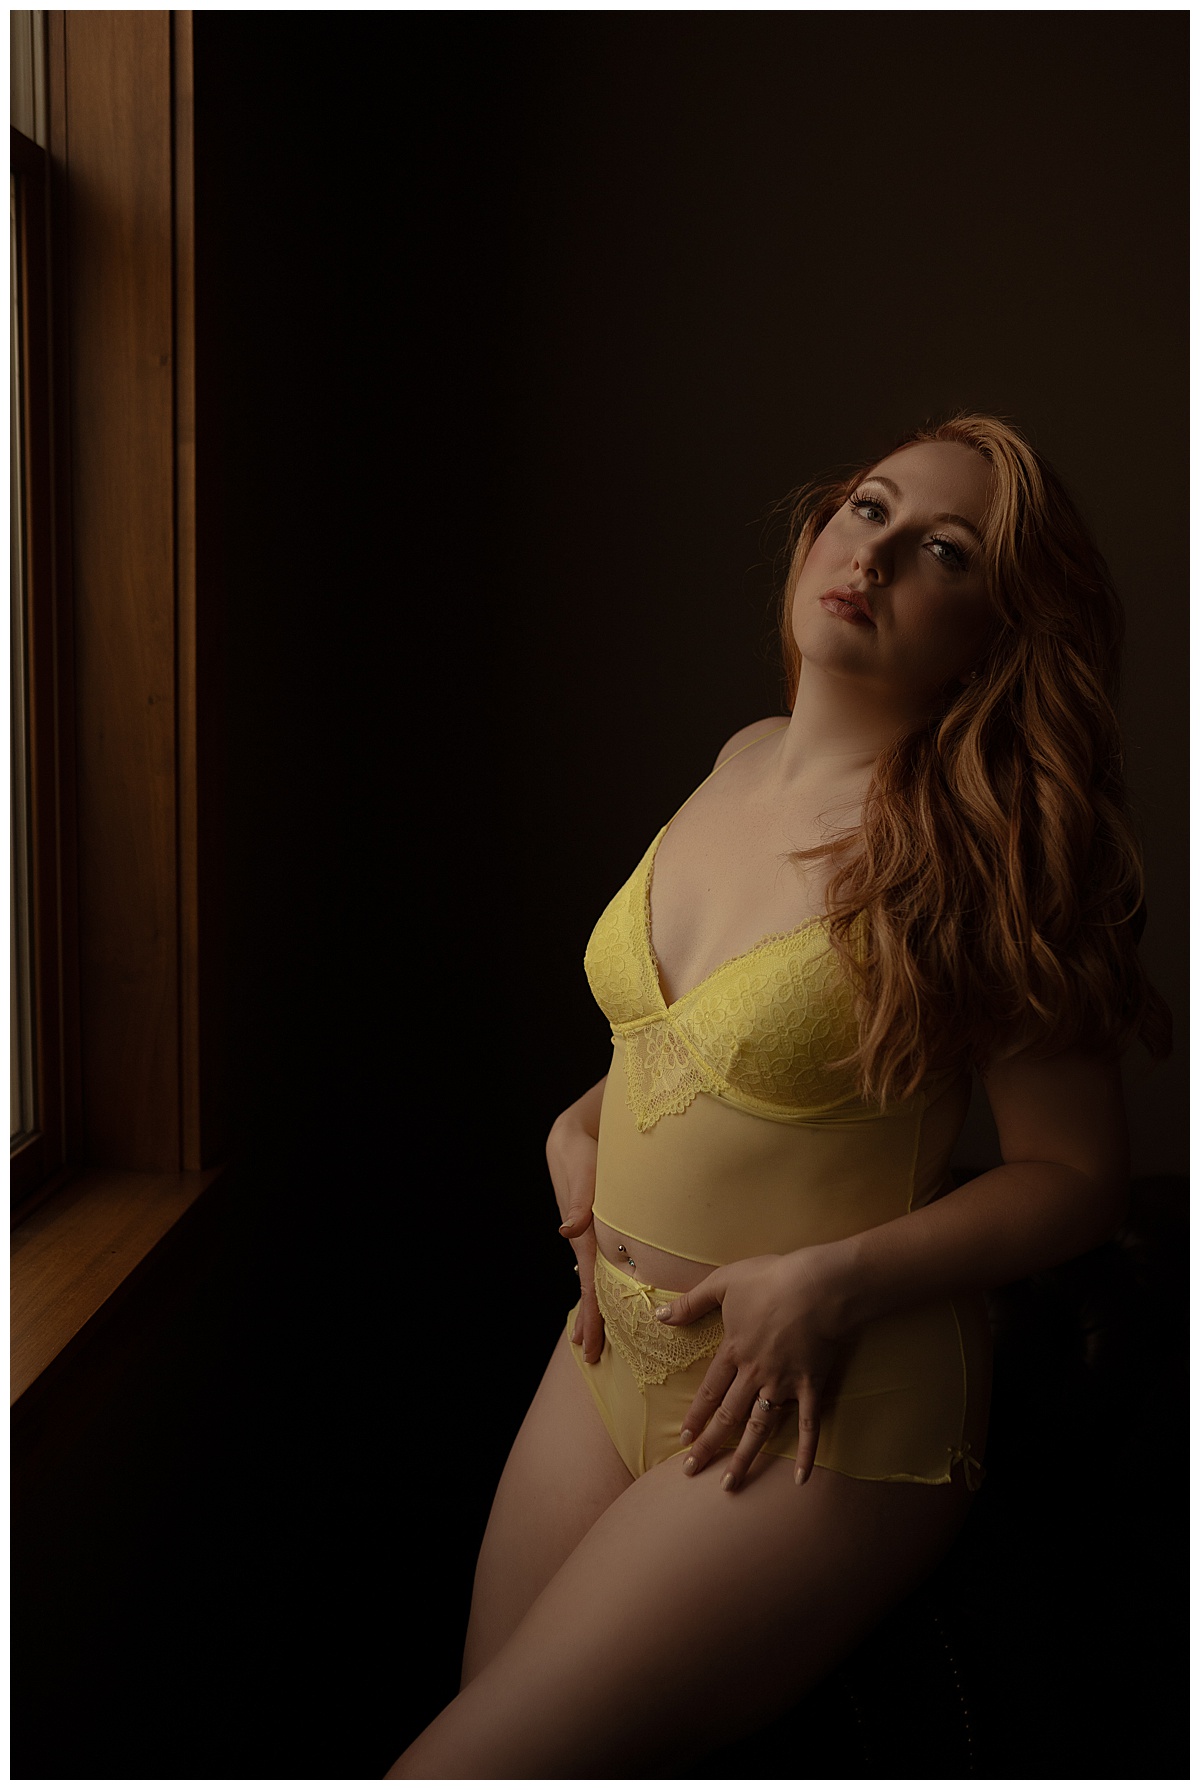 Girl holds hands against body in yellow lingerie for Sioux Falls Boudoir Photographer